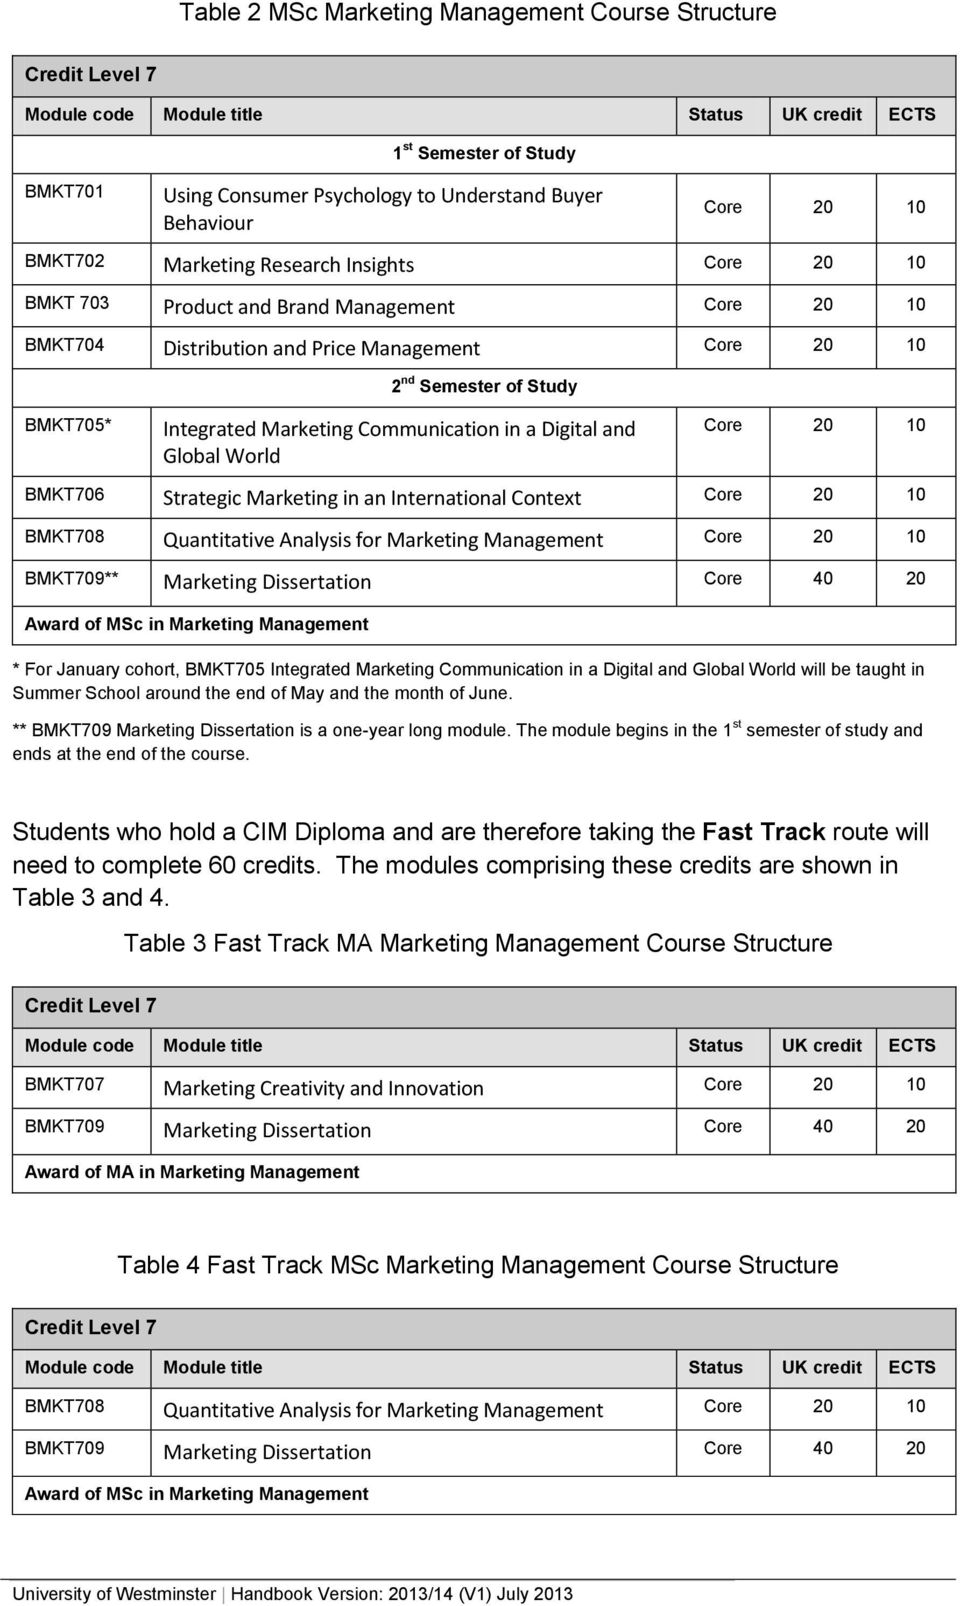 Integrated Marketing Communication in a Digital and Global World Core 20 10 BMKT706 Strategic Marketing in an International Context Core 20 10 BMKT708 Quantitative Analysis for Marketing Management